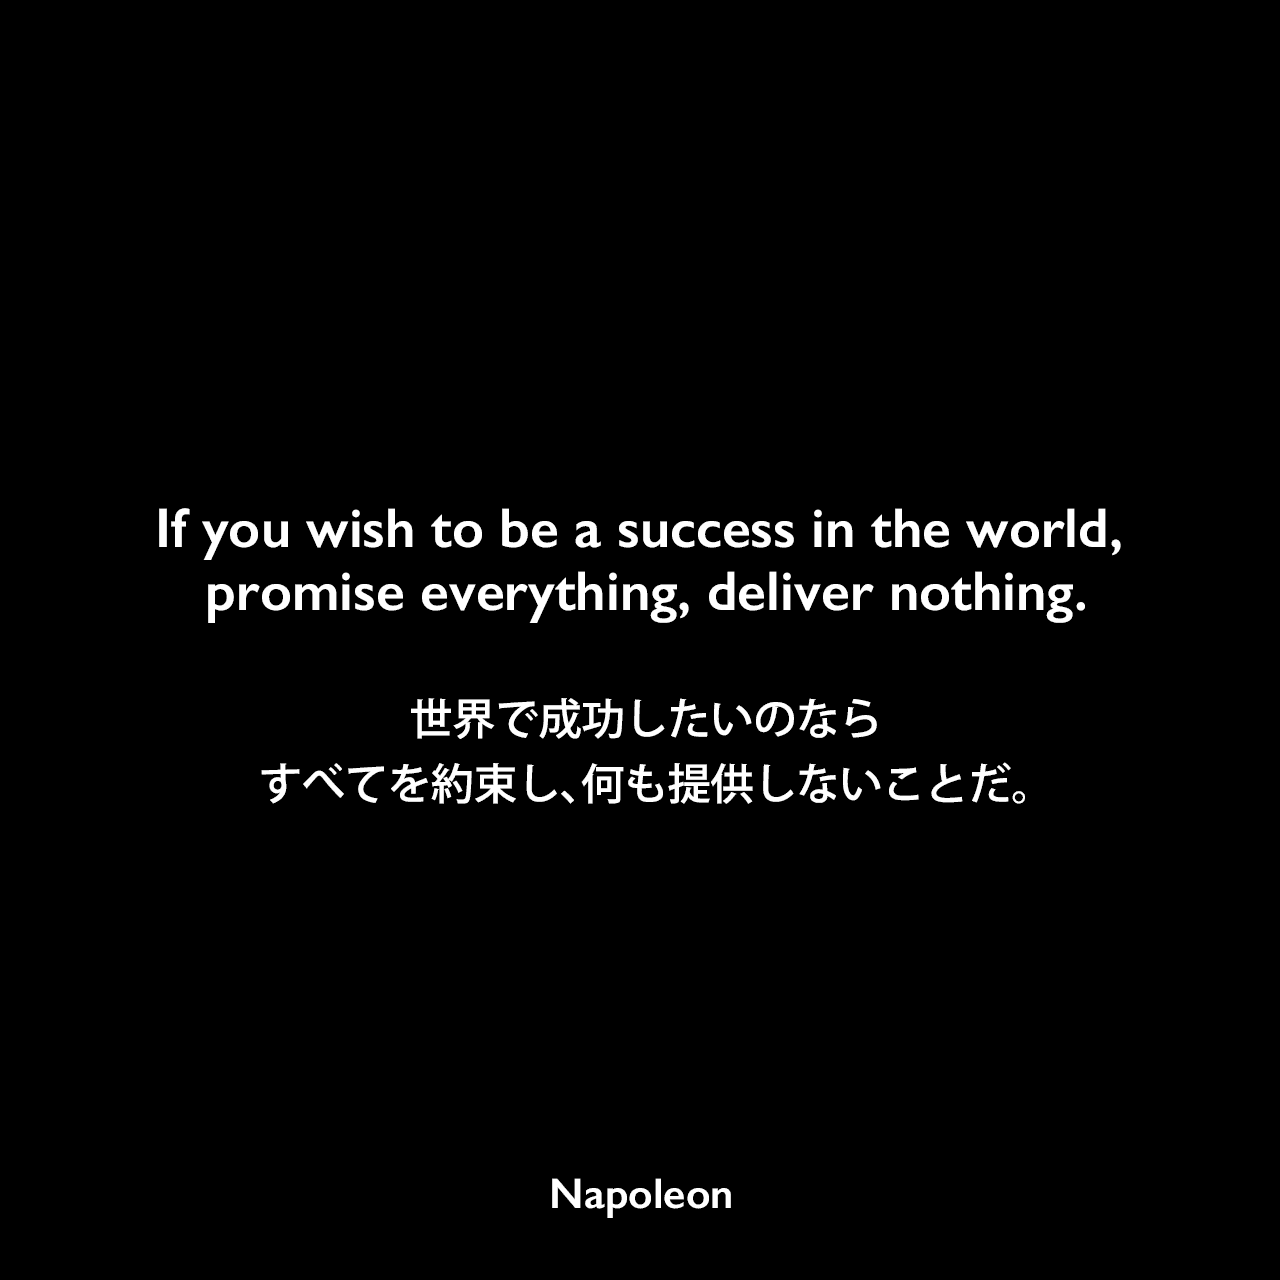 If you wish to be a success in the world, promise everything, deliver nothing.世界で成功したいのなら、すべてを約束し、何も提供しないことだ。Napoleon